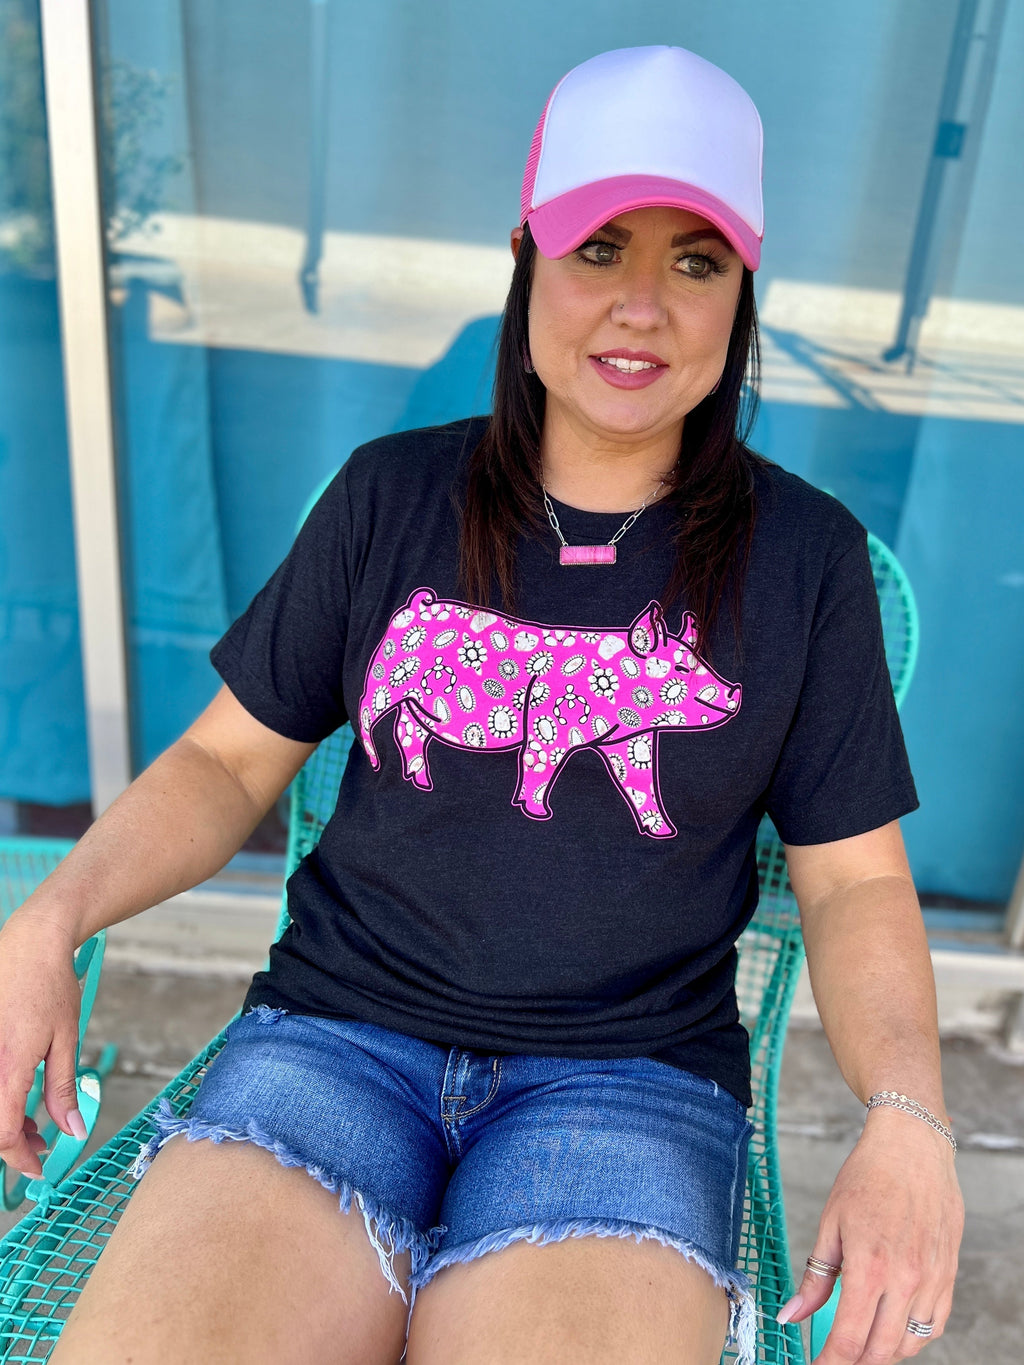 Sterling Kreek Tee. Graphic tee. Stock show shirt. Pink pig shirt. Pig shirt. Western style tee. Black tee shirt. Boutique style. Women's western wear. Women's western boutique. Western boutique. Online shopping. Online boutique. Boutique. Small business. Woman Owned. Fast shipping from Texas.